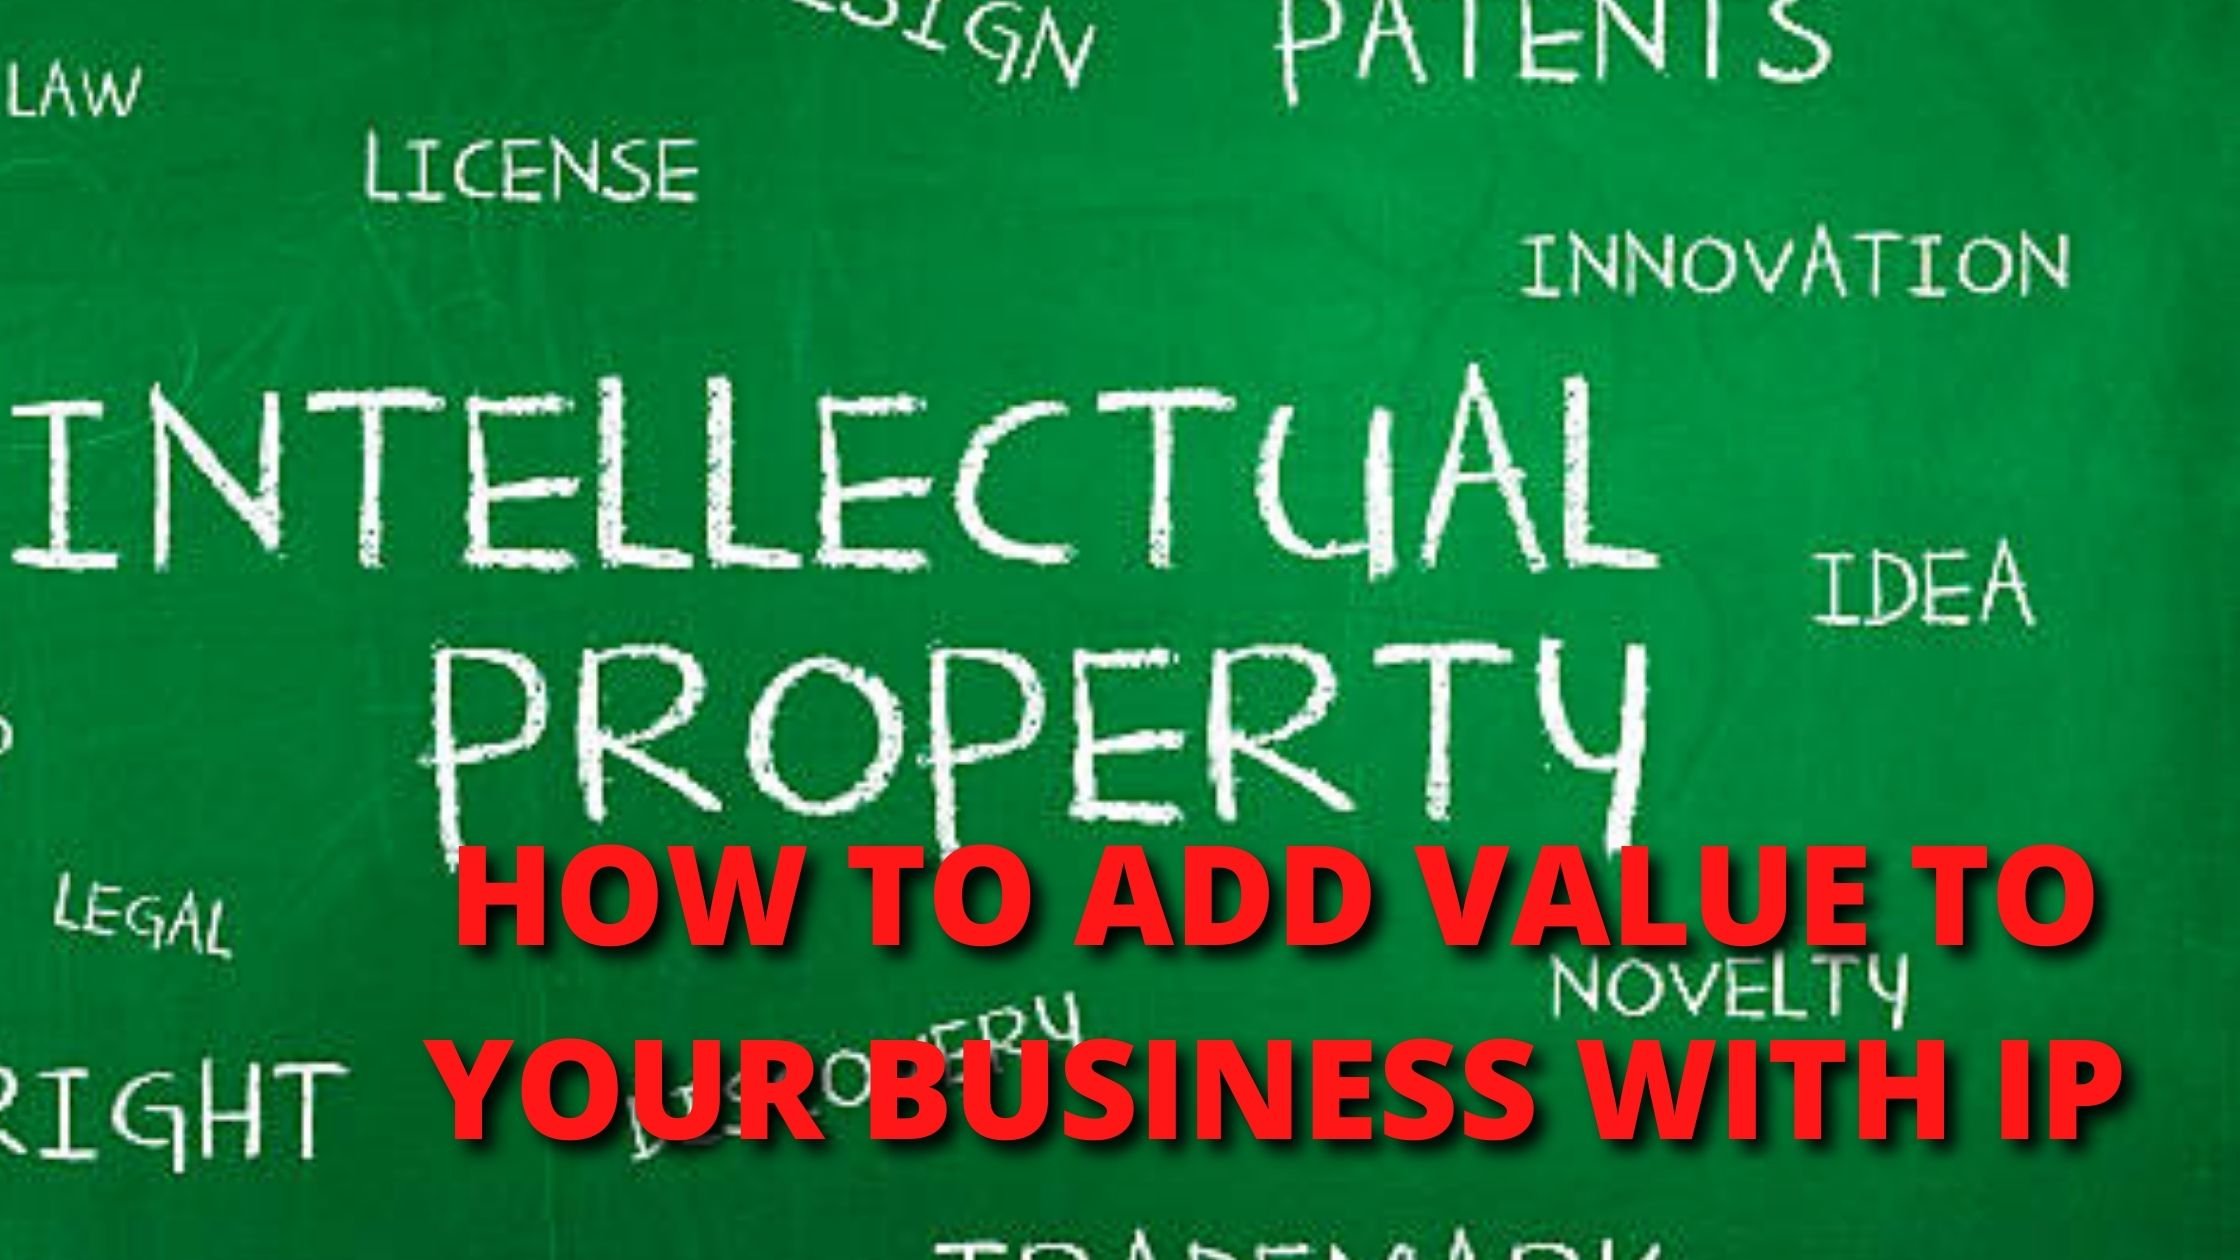 HOW TO ADD VALUE TO YOUR BUSINESS WITH INTELLECTUAL PROPERTY